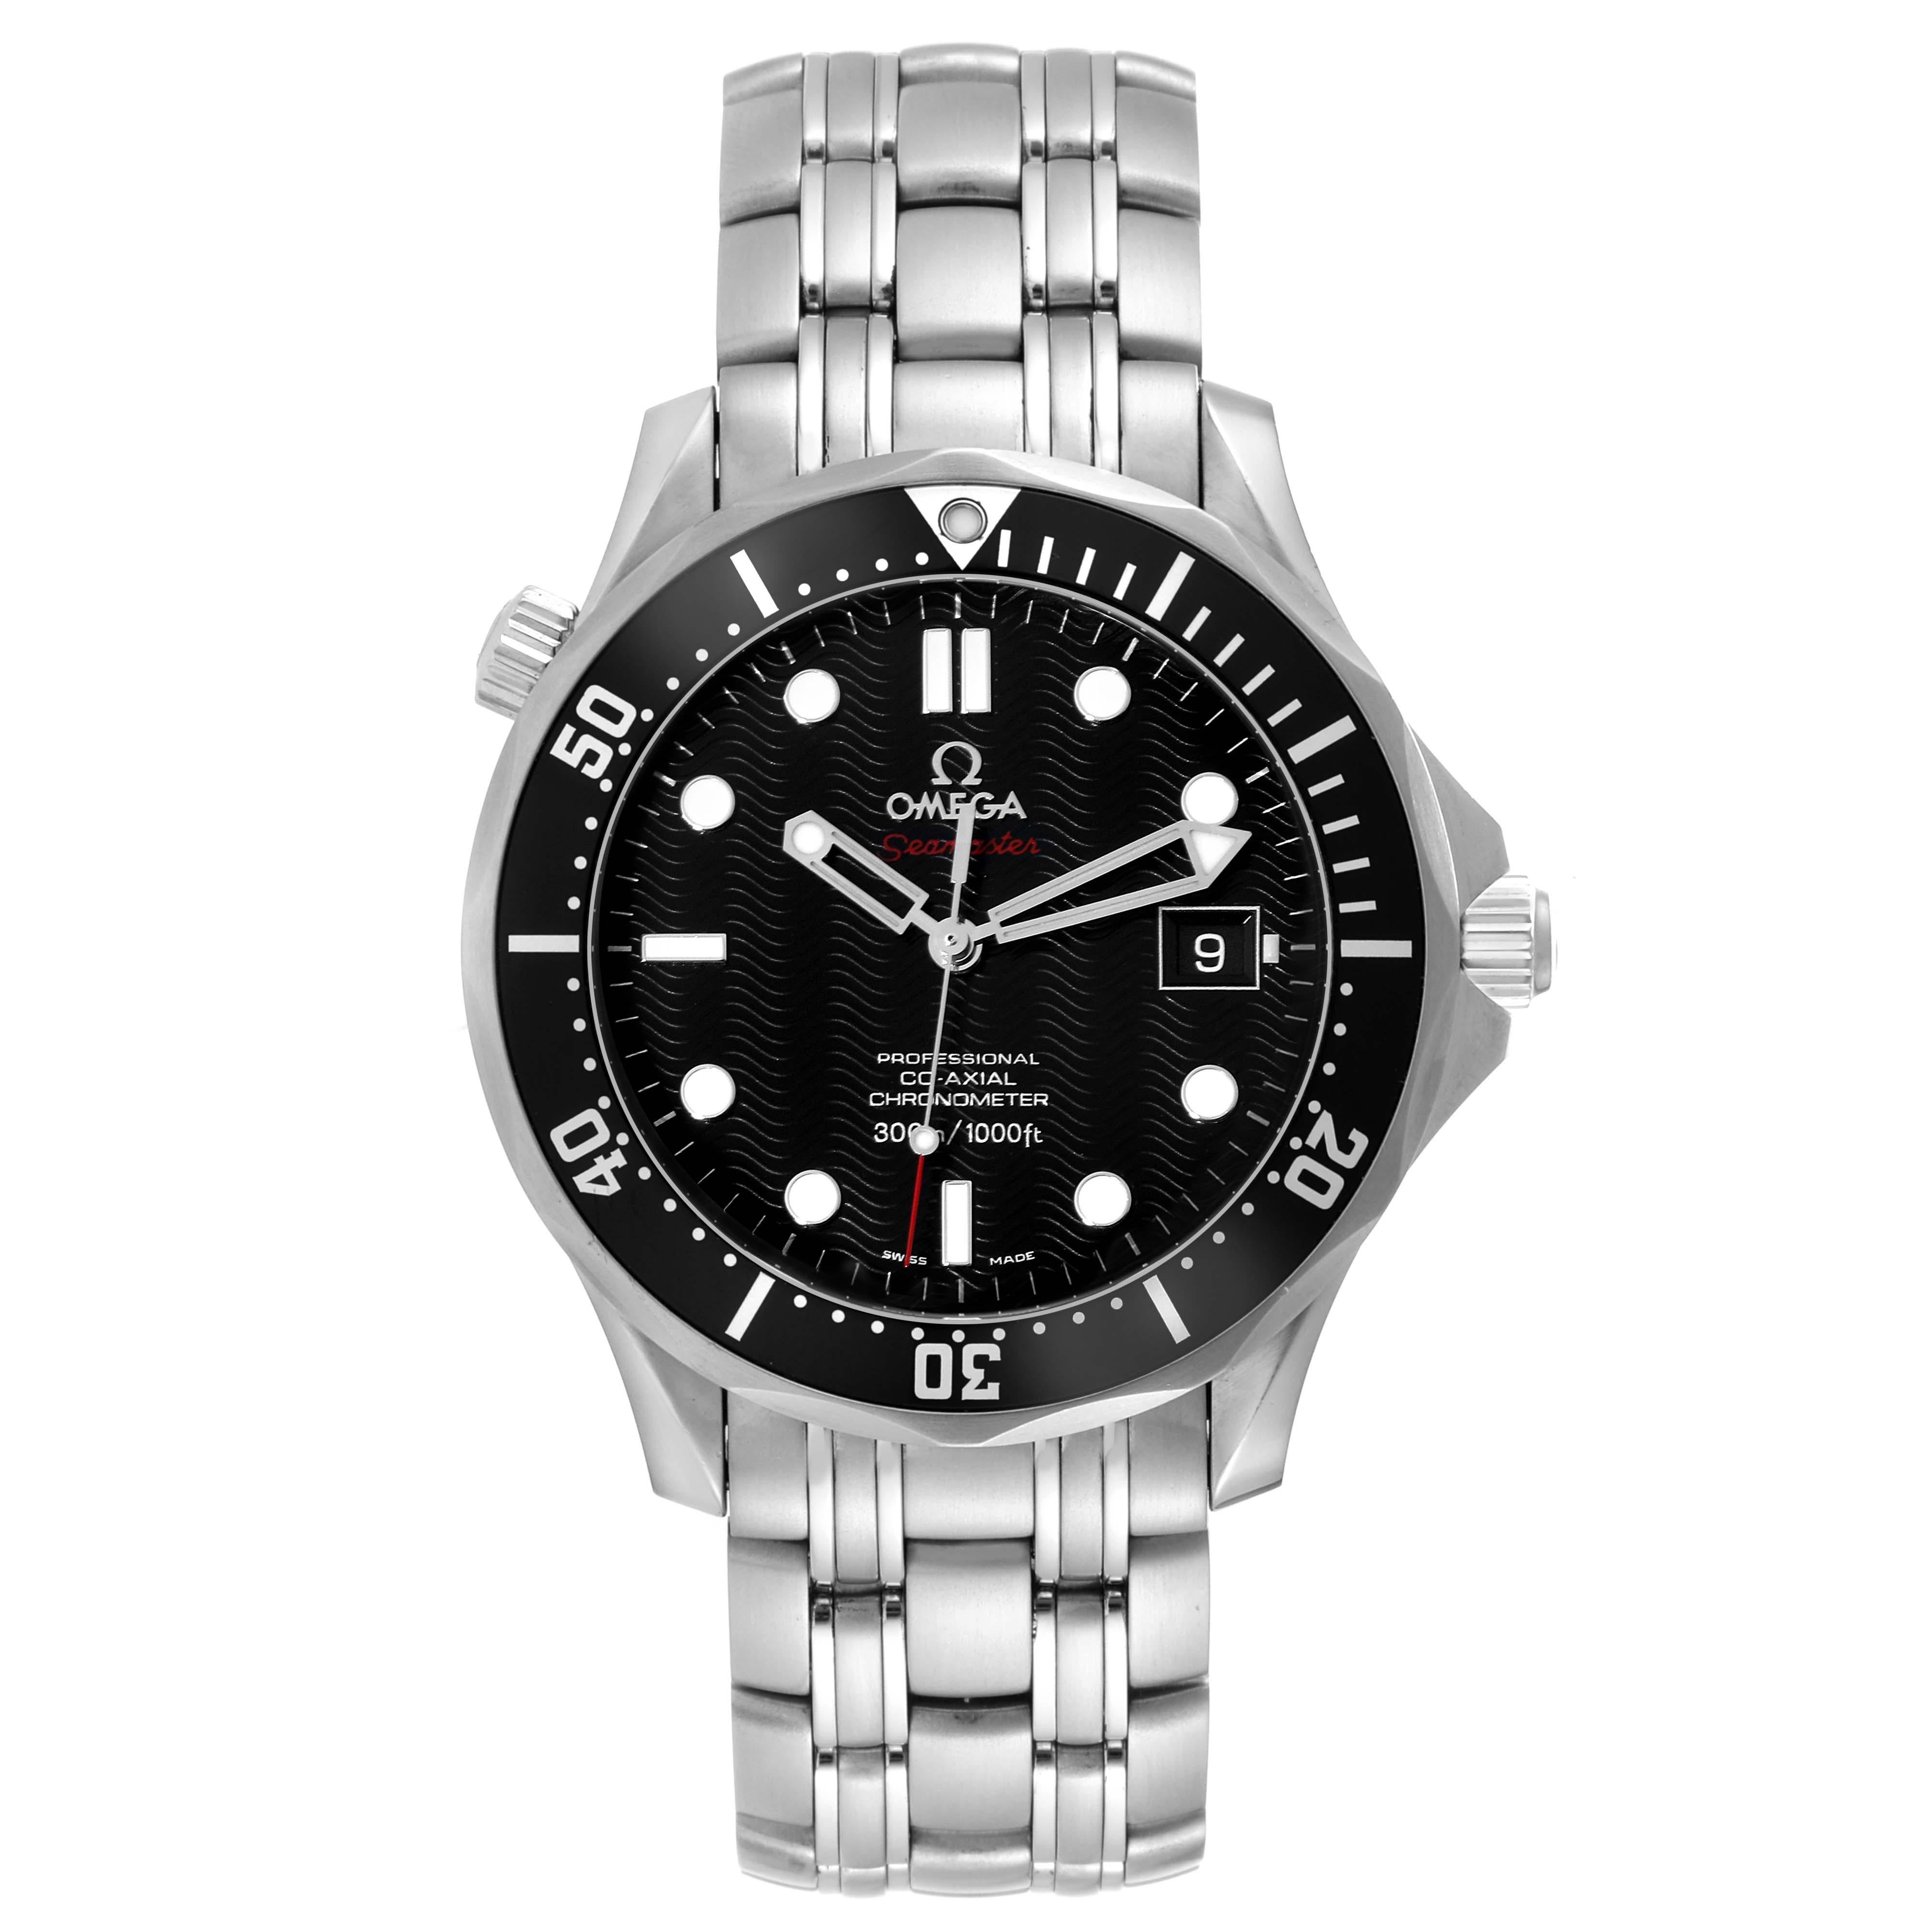 Omega Seamaster Black Dial Steel Mens Watch 212.30.41.20.01.002 Box Card. Automatic self-winding movement. Stainless steel case 41.0 mm in diameter. Helium escape valve at 10 o'clock. Omega logo on the crown. Black unidirectional rotating bezel.